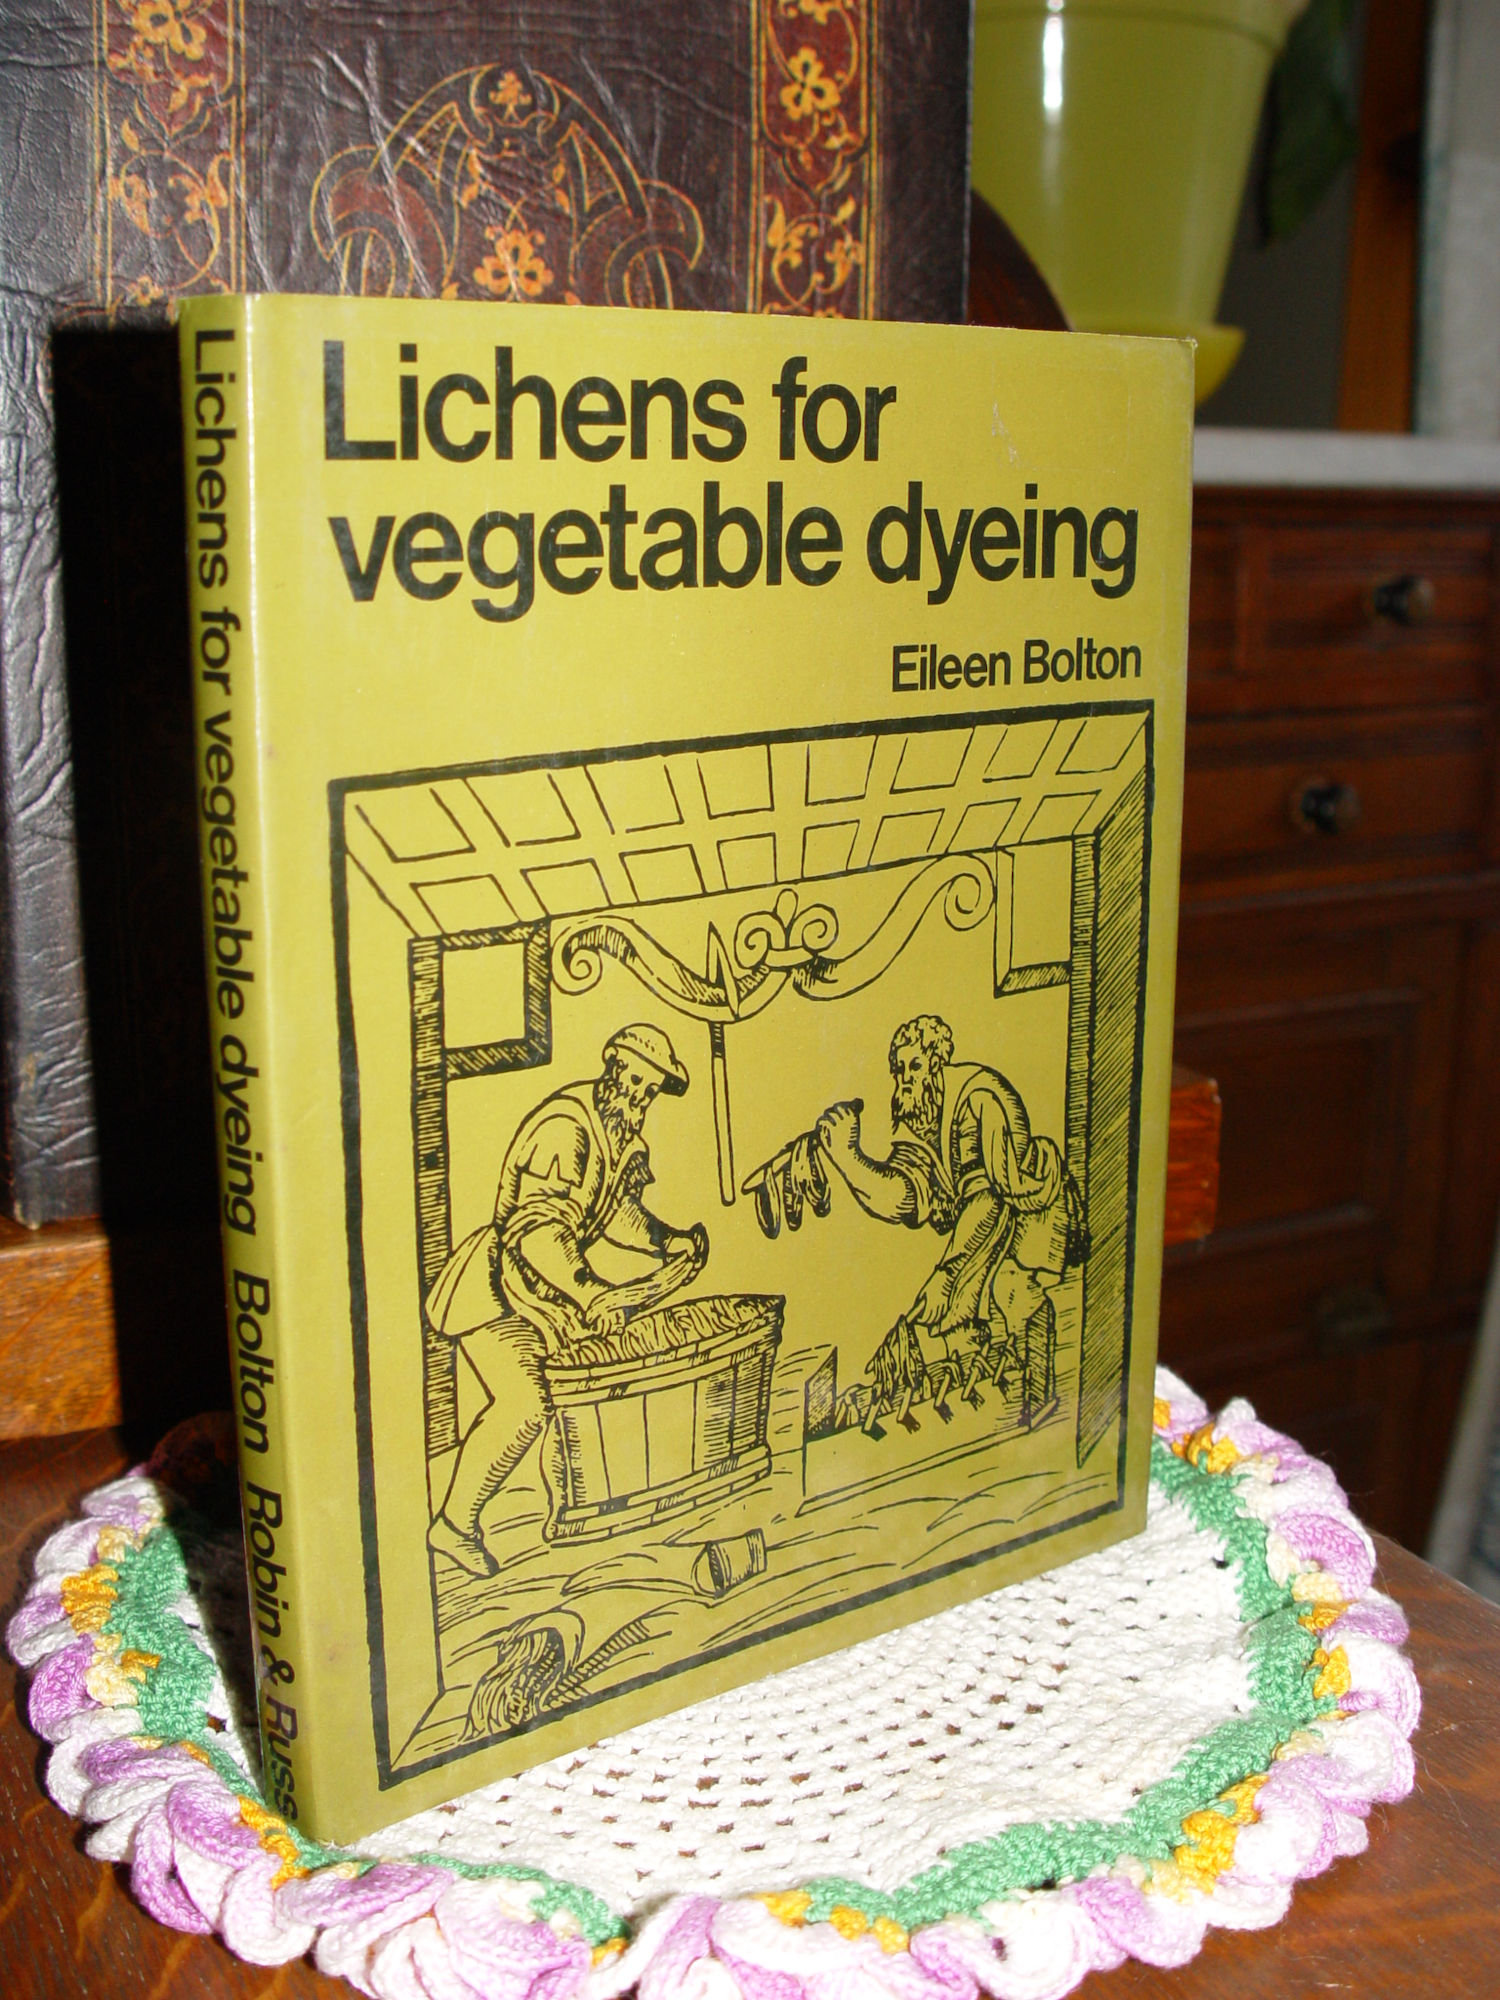 Lichens for Vegetable Dyeing by Eileen
                        Bolton 1972